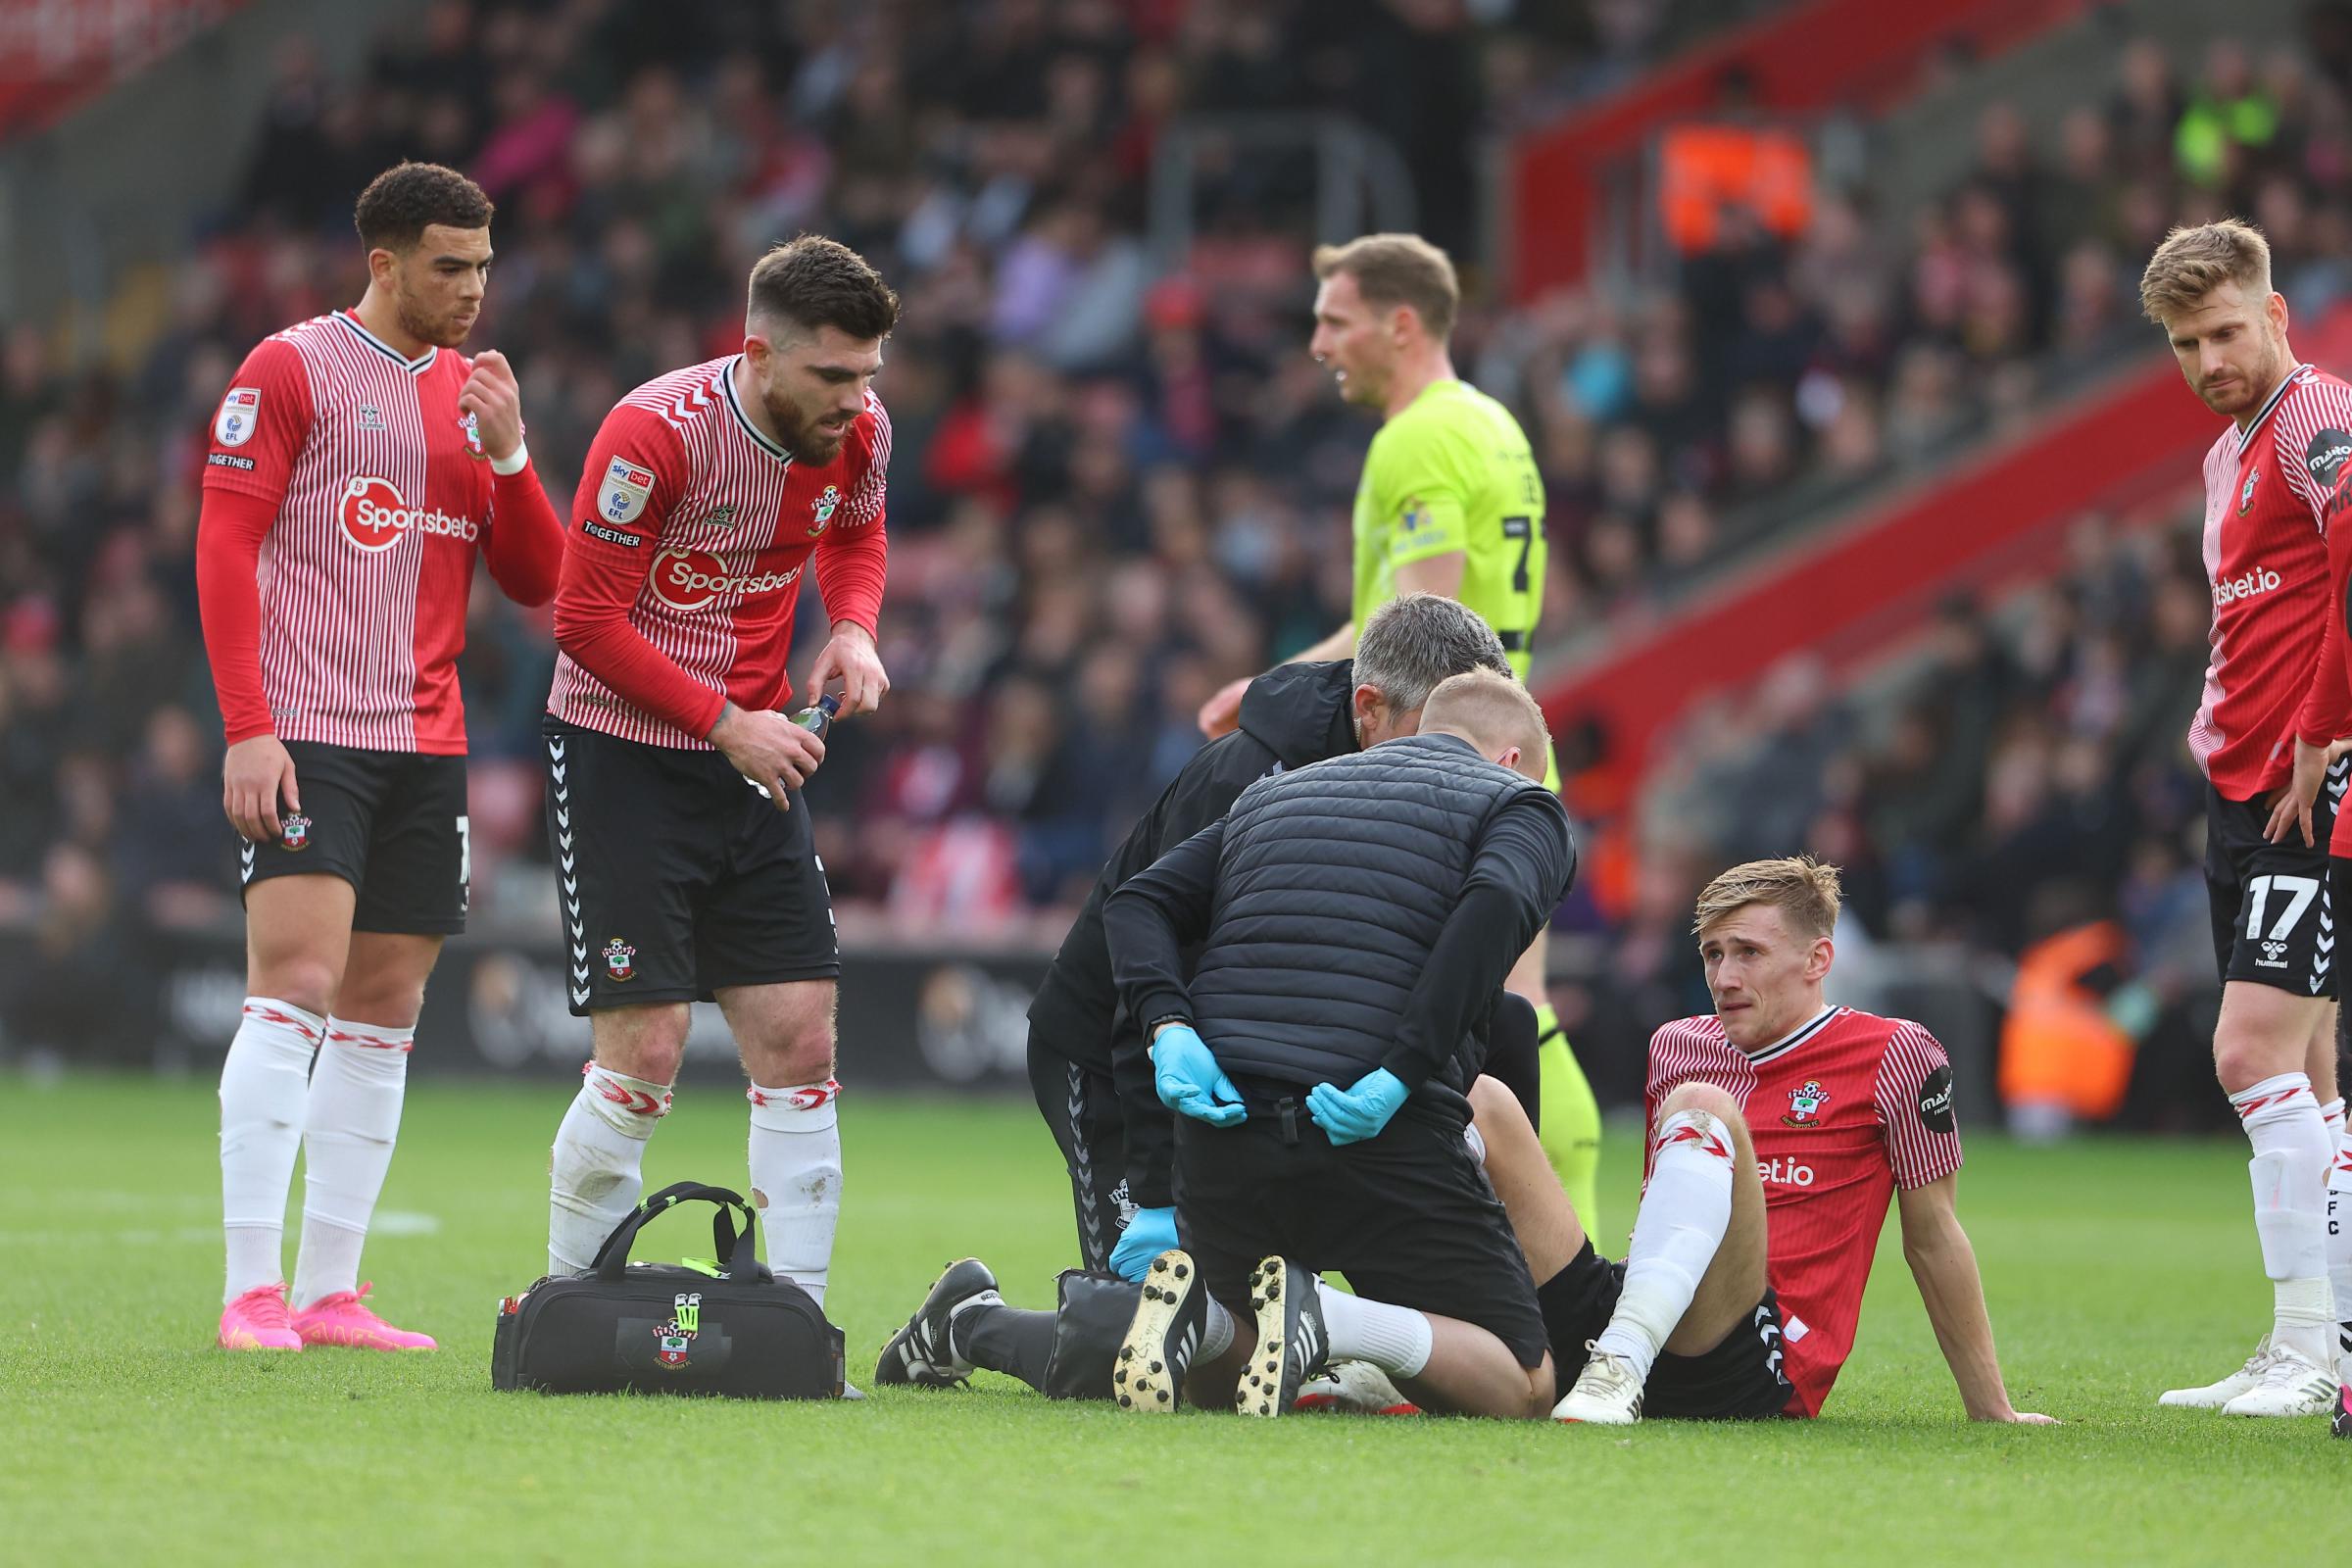 Southampton's Martin gives update on Downes, Adams and Aribo's return